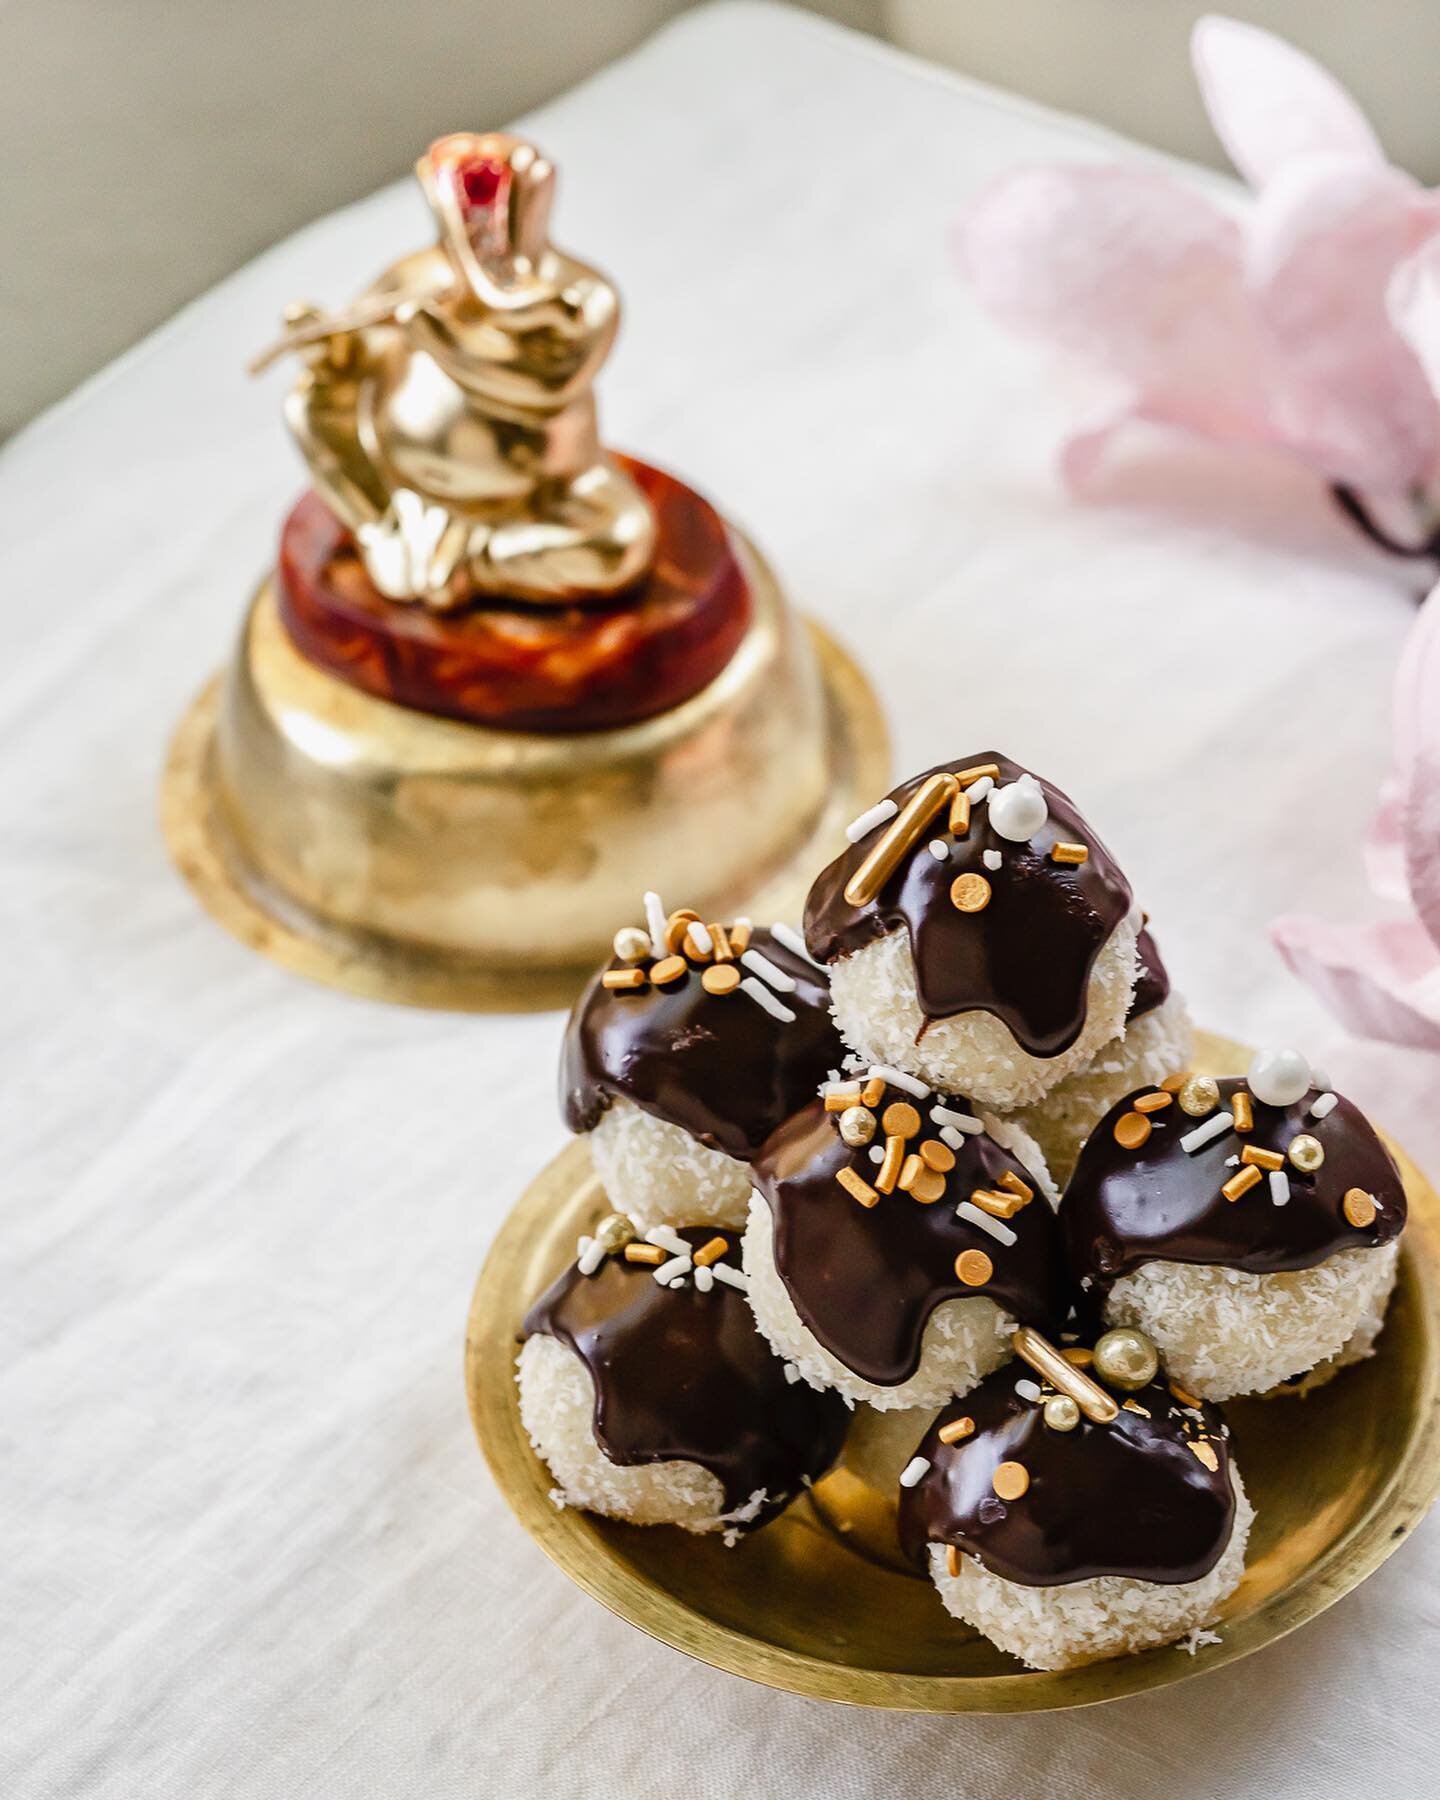 Coconut 🥥 Laddoos with Chocolate Ganache drizzle for Ganesh&rsquo;s birthday. 

Ganesh Chaturthi is a 10-day celebration commemorating the birth of Hindu God Ganesh. Elaborately decorated pandals (temporary display stage) with a statue of Ganesh, is